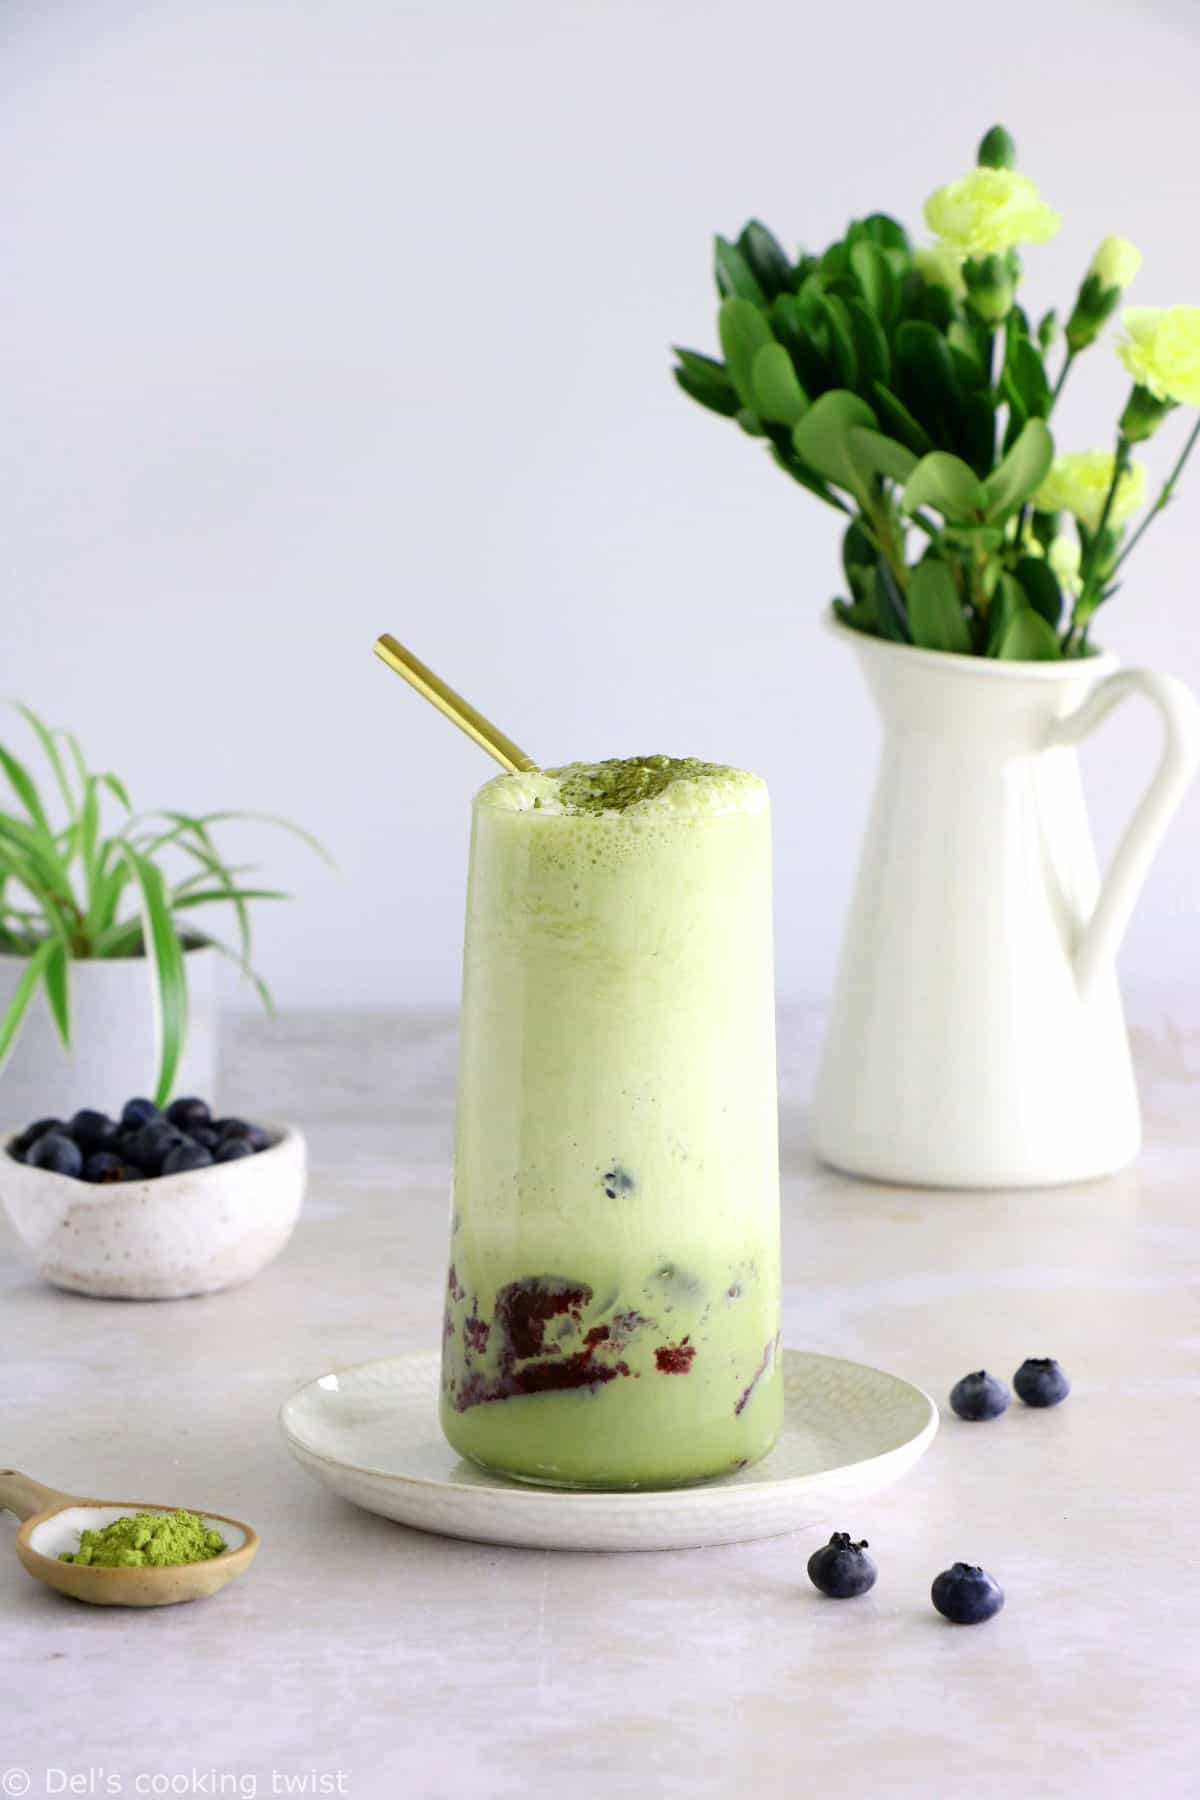 Matcha frappuccino is easy to make in a blender in just a few seconds. This frozen green tea latte is sweet and delicious, and even comes with a blueberry swirl bottom.